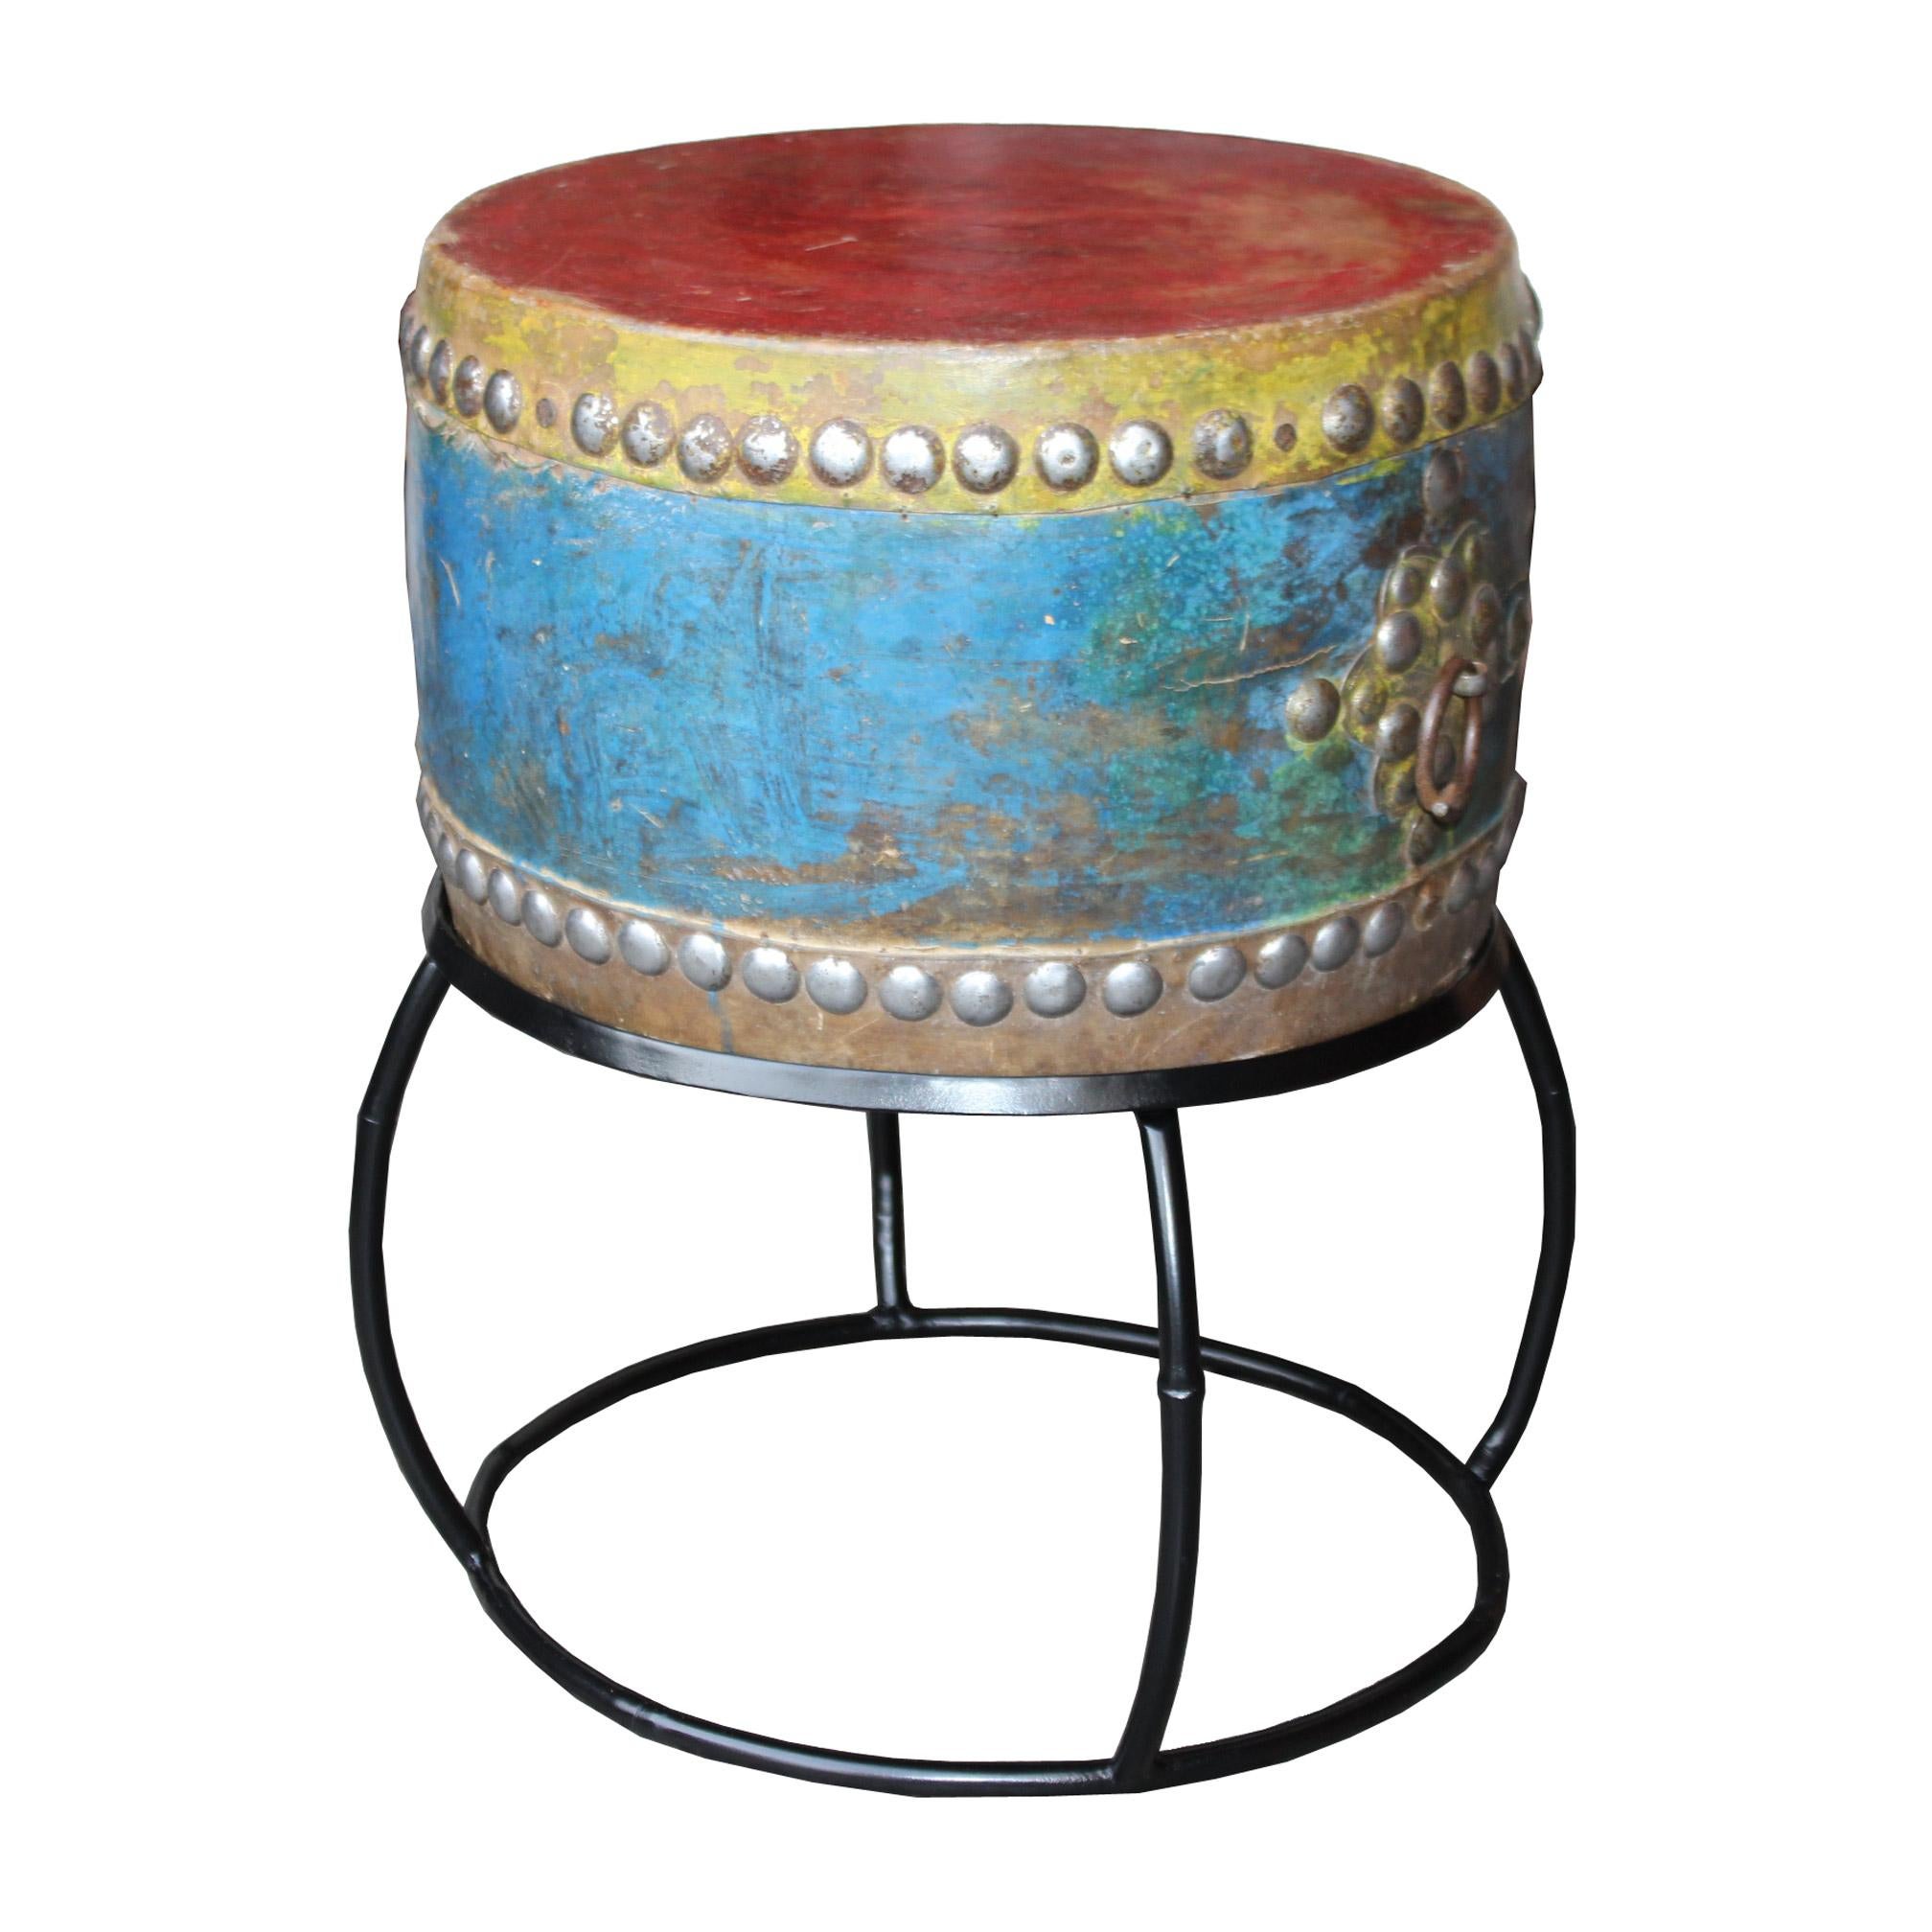 Antique Korean shaman's drum on contemporary custom made stand. Used for ceremonies, rituals and folk dancing in villages to promote positive outcome. Colorful drum sits on a metal stand.